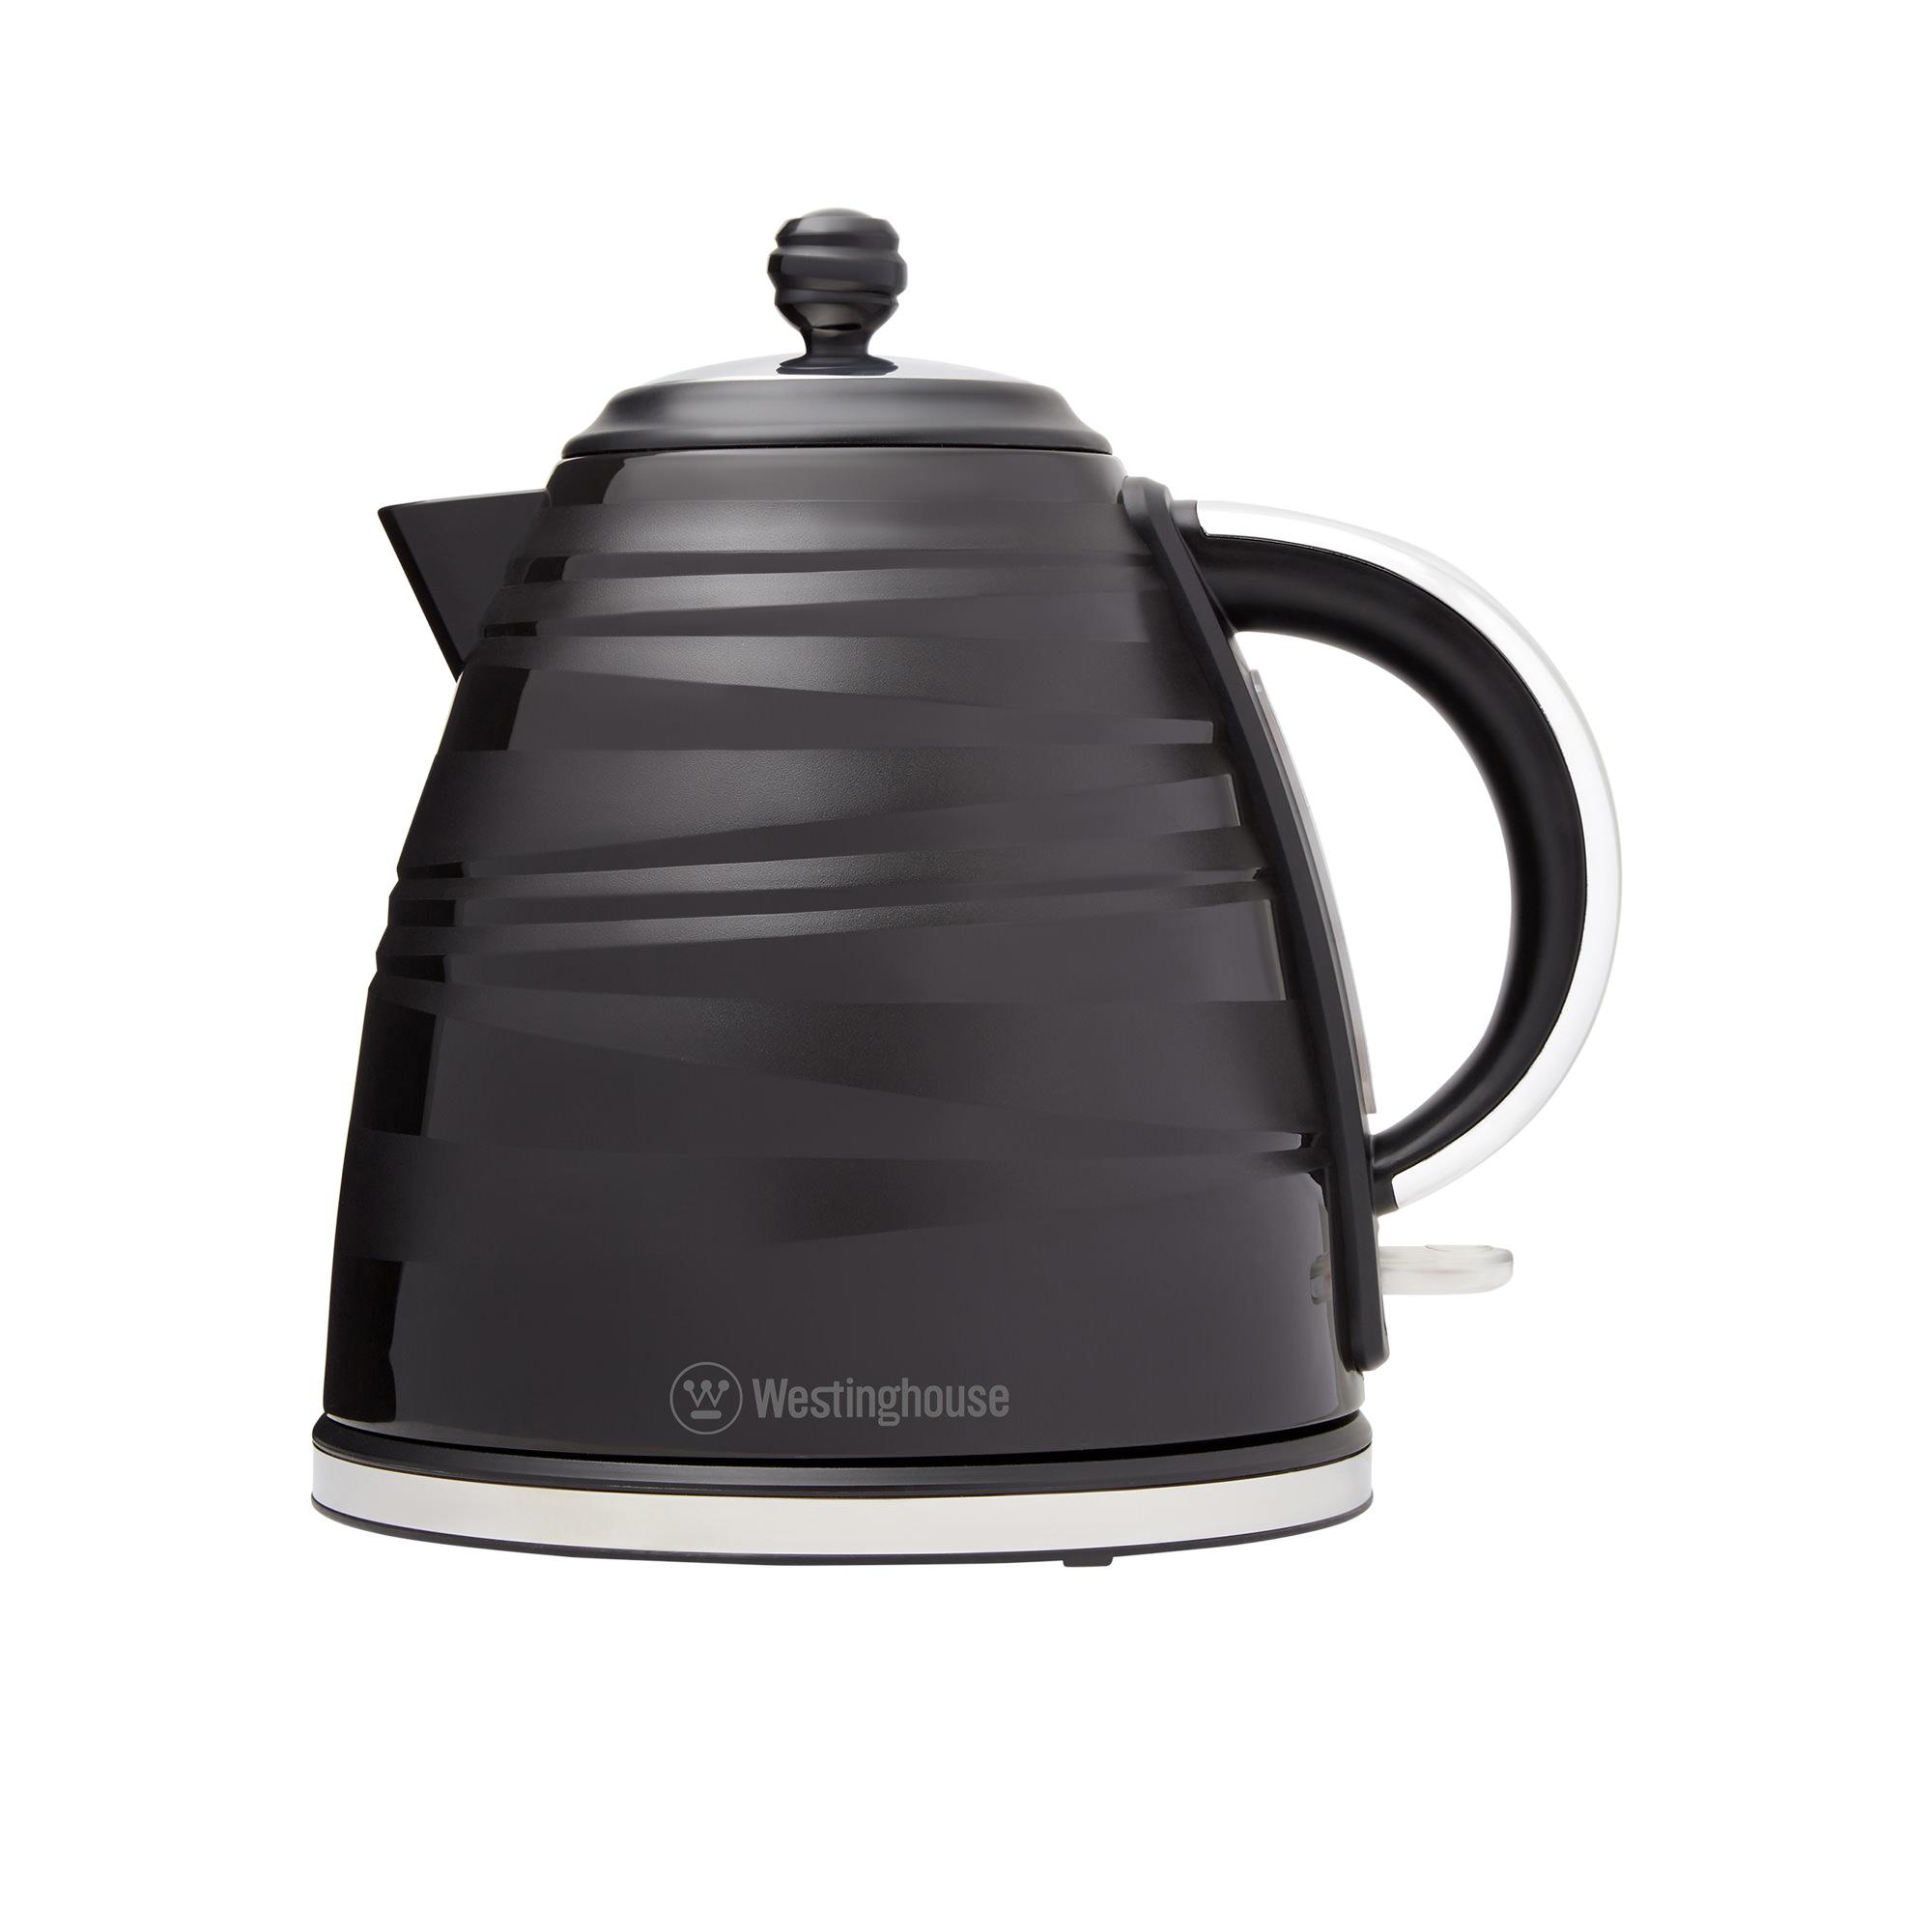 Westinghouse Kettle and Toaster Pack Black Image 6